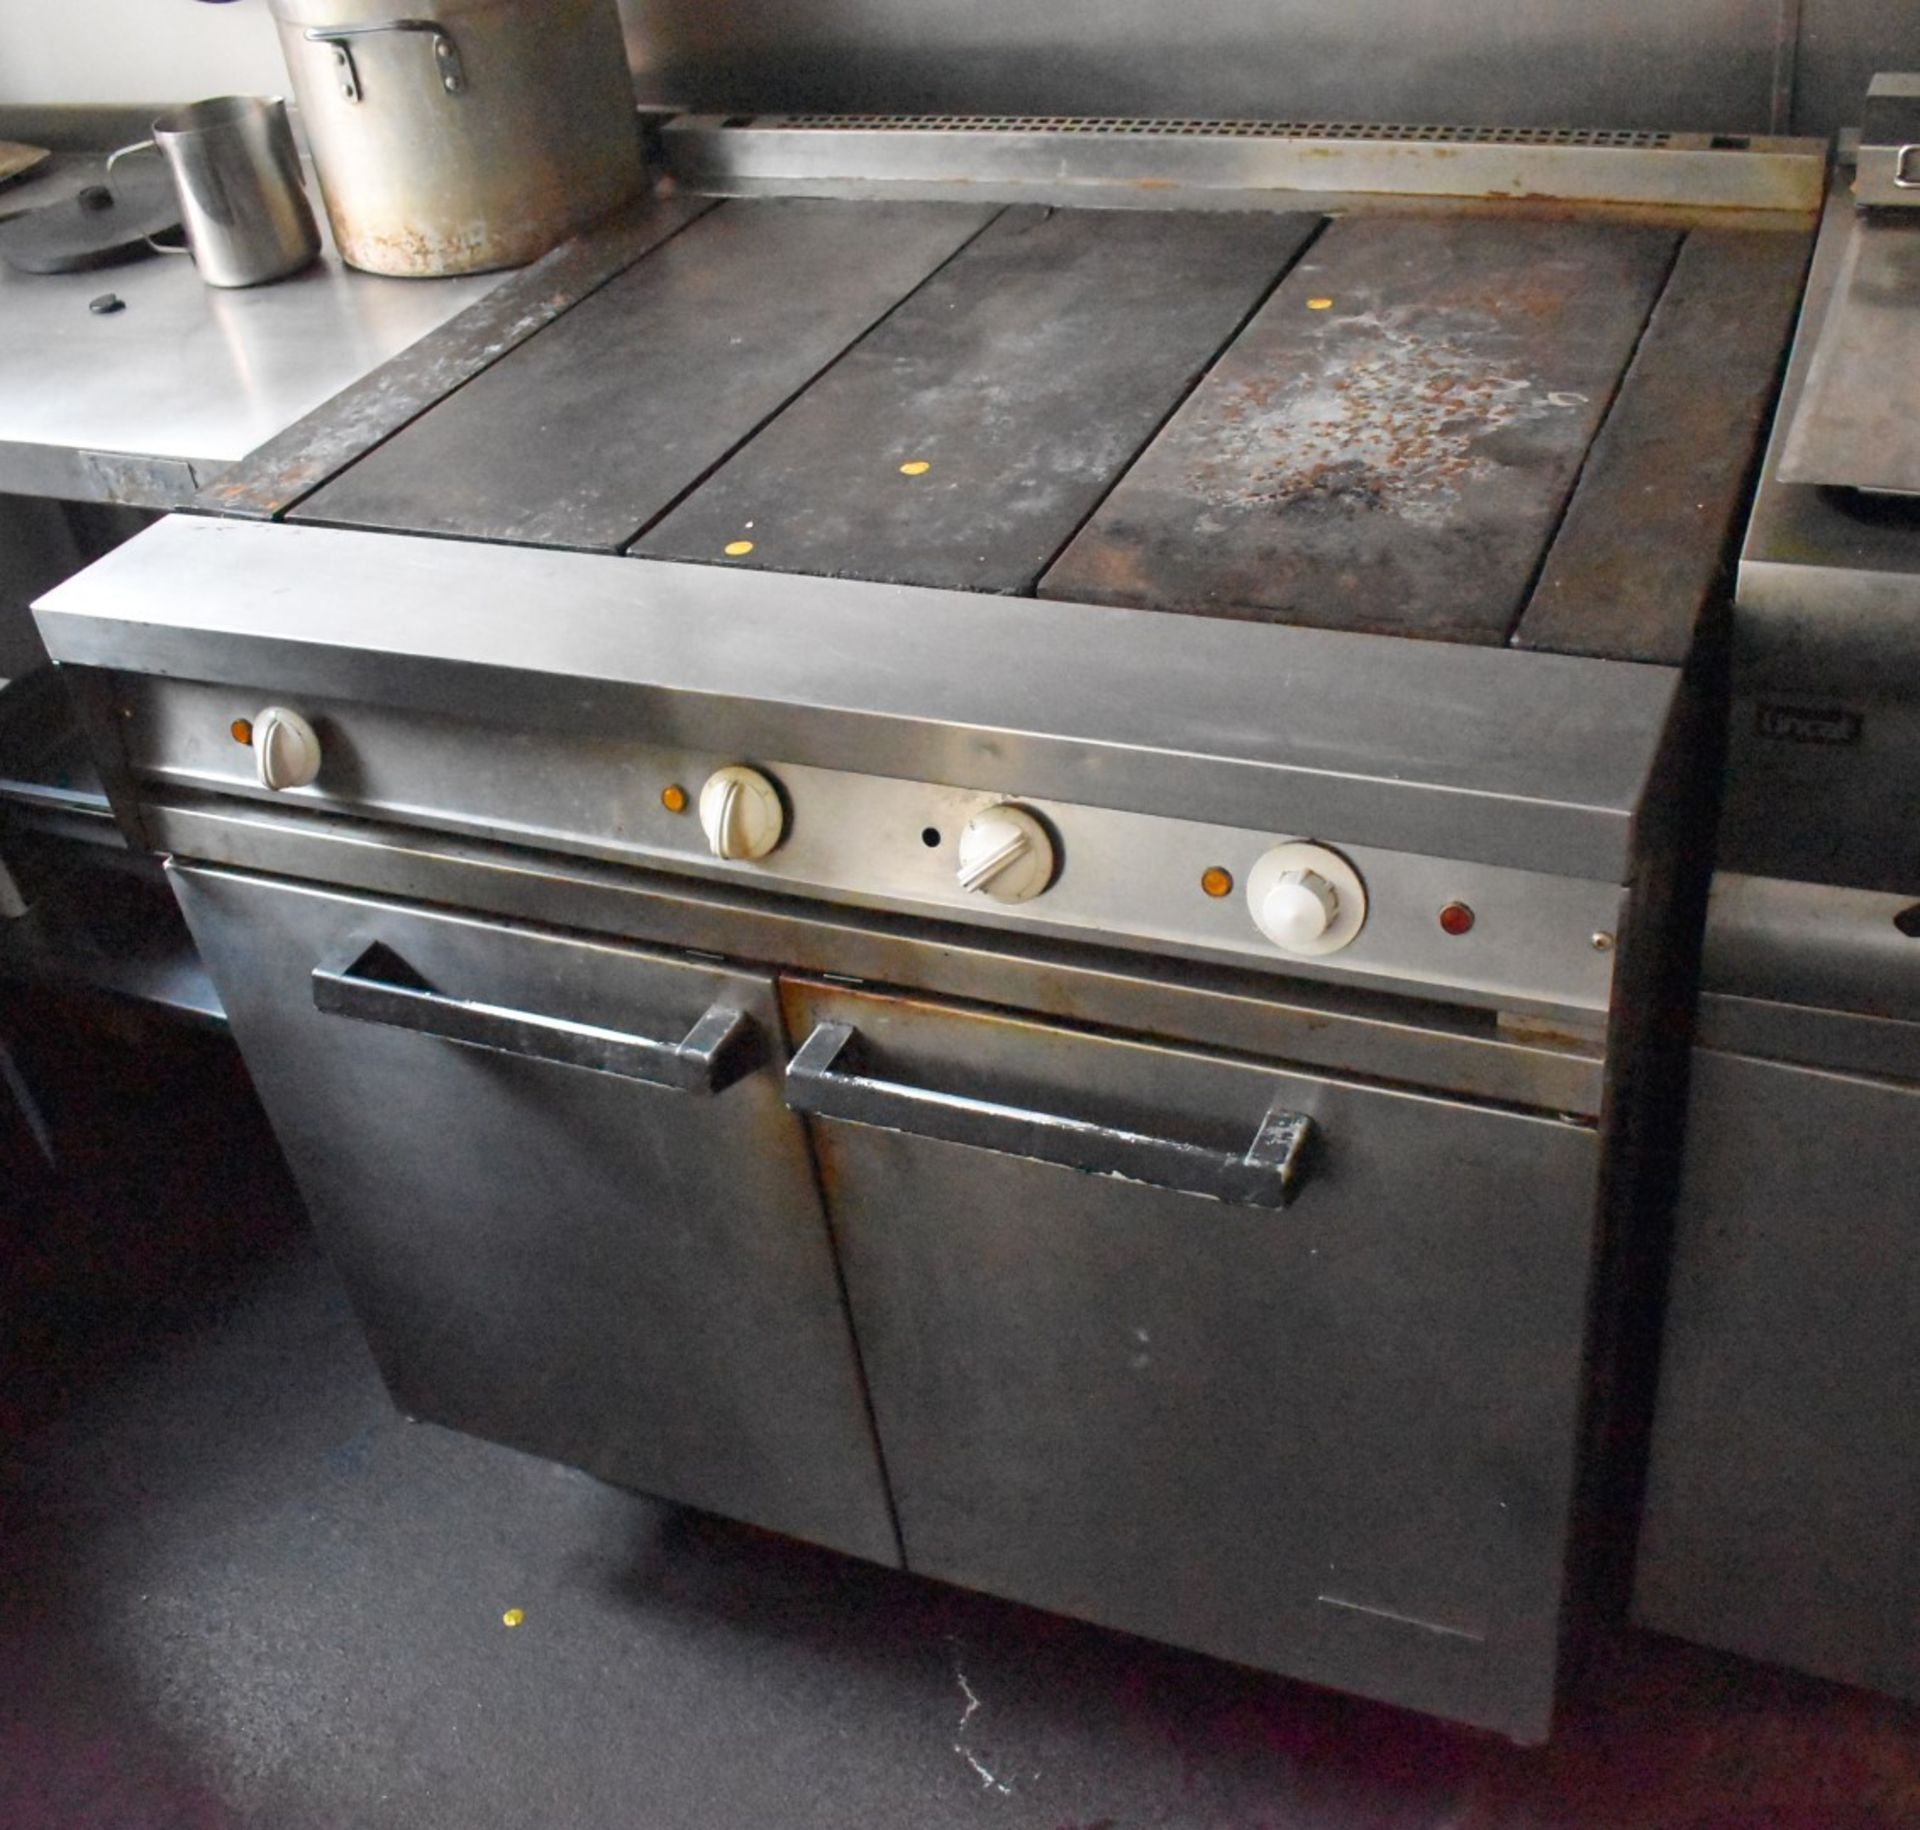 1 x Solid Top Commercial Range Cooker Oven - 90cm Wide - 3 Phase Power - CL586